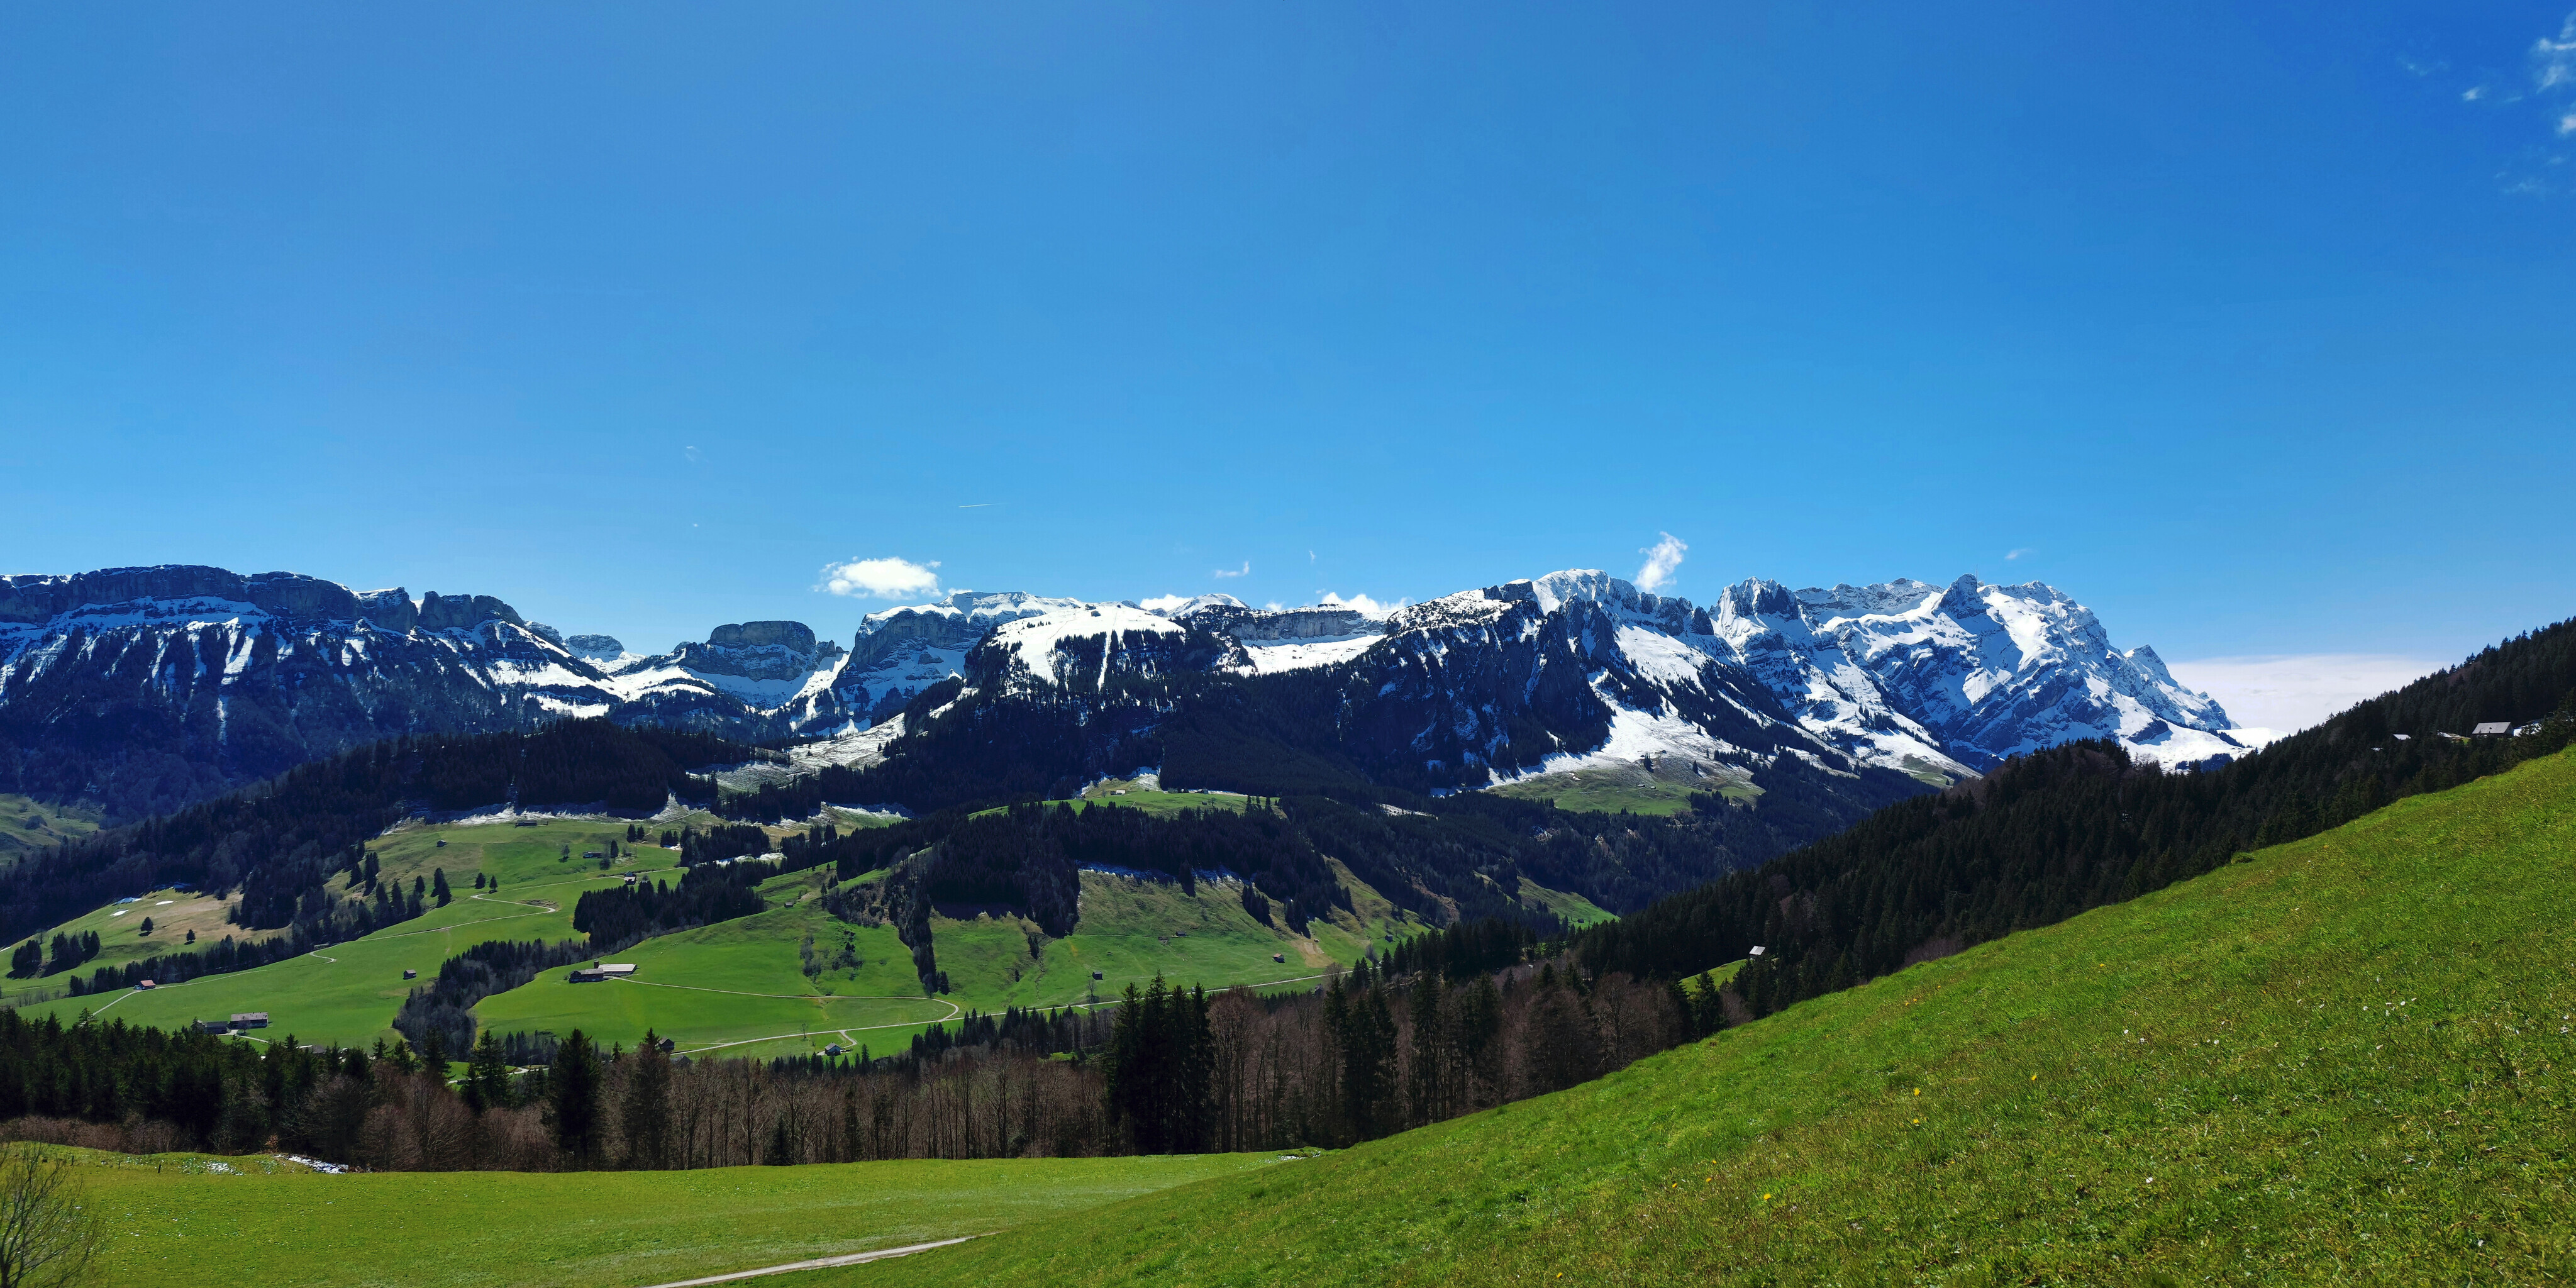 Säntis covered in snow, green fields, and blue skies